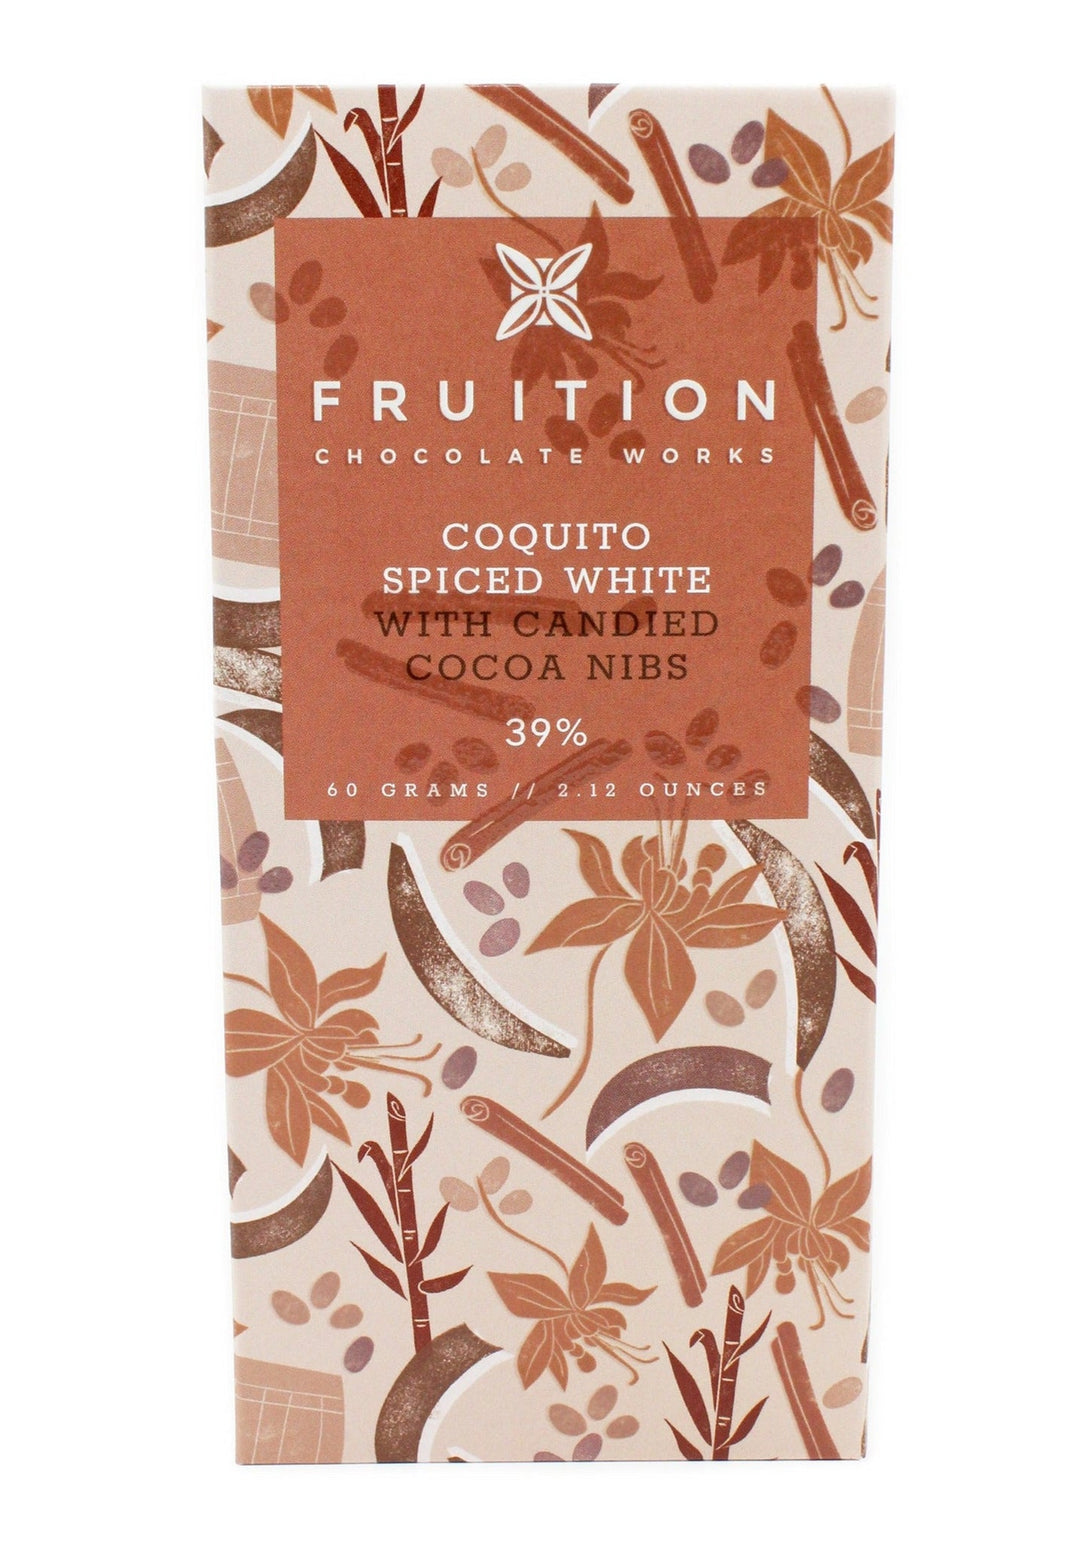 Fruition Coquito Spiced White Chocolate 39% with Candied Cocoa Nibs